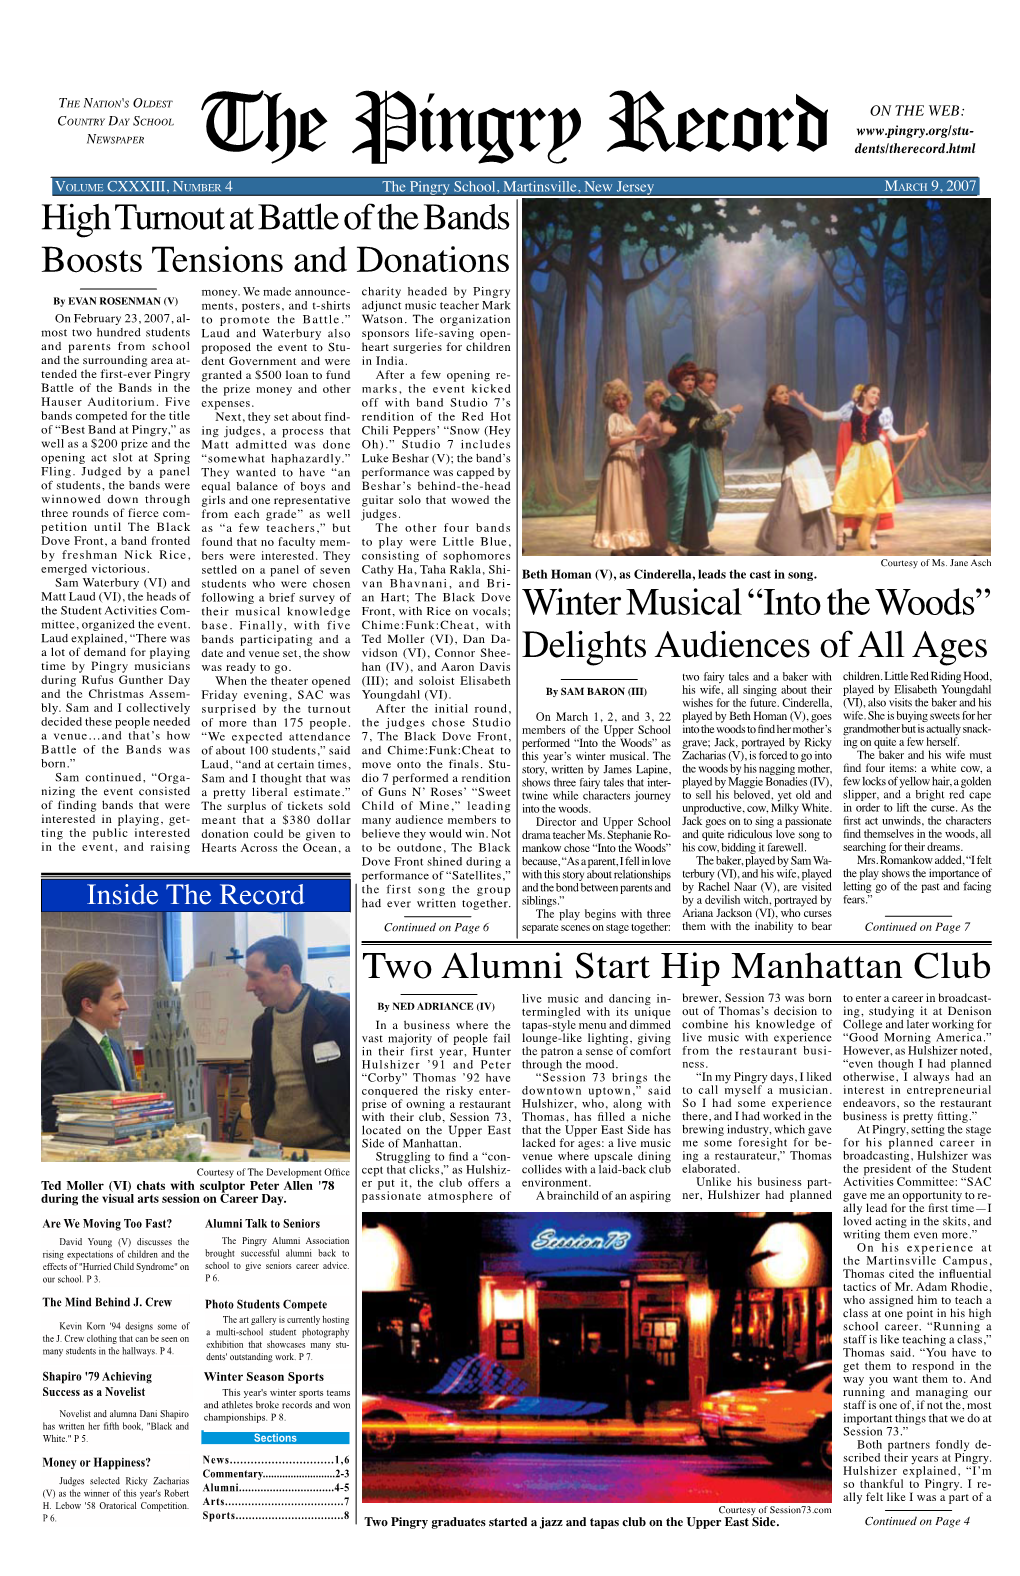 Winter Musical “Into the Woods” Delights Audiences of All Ages